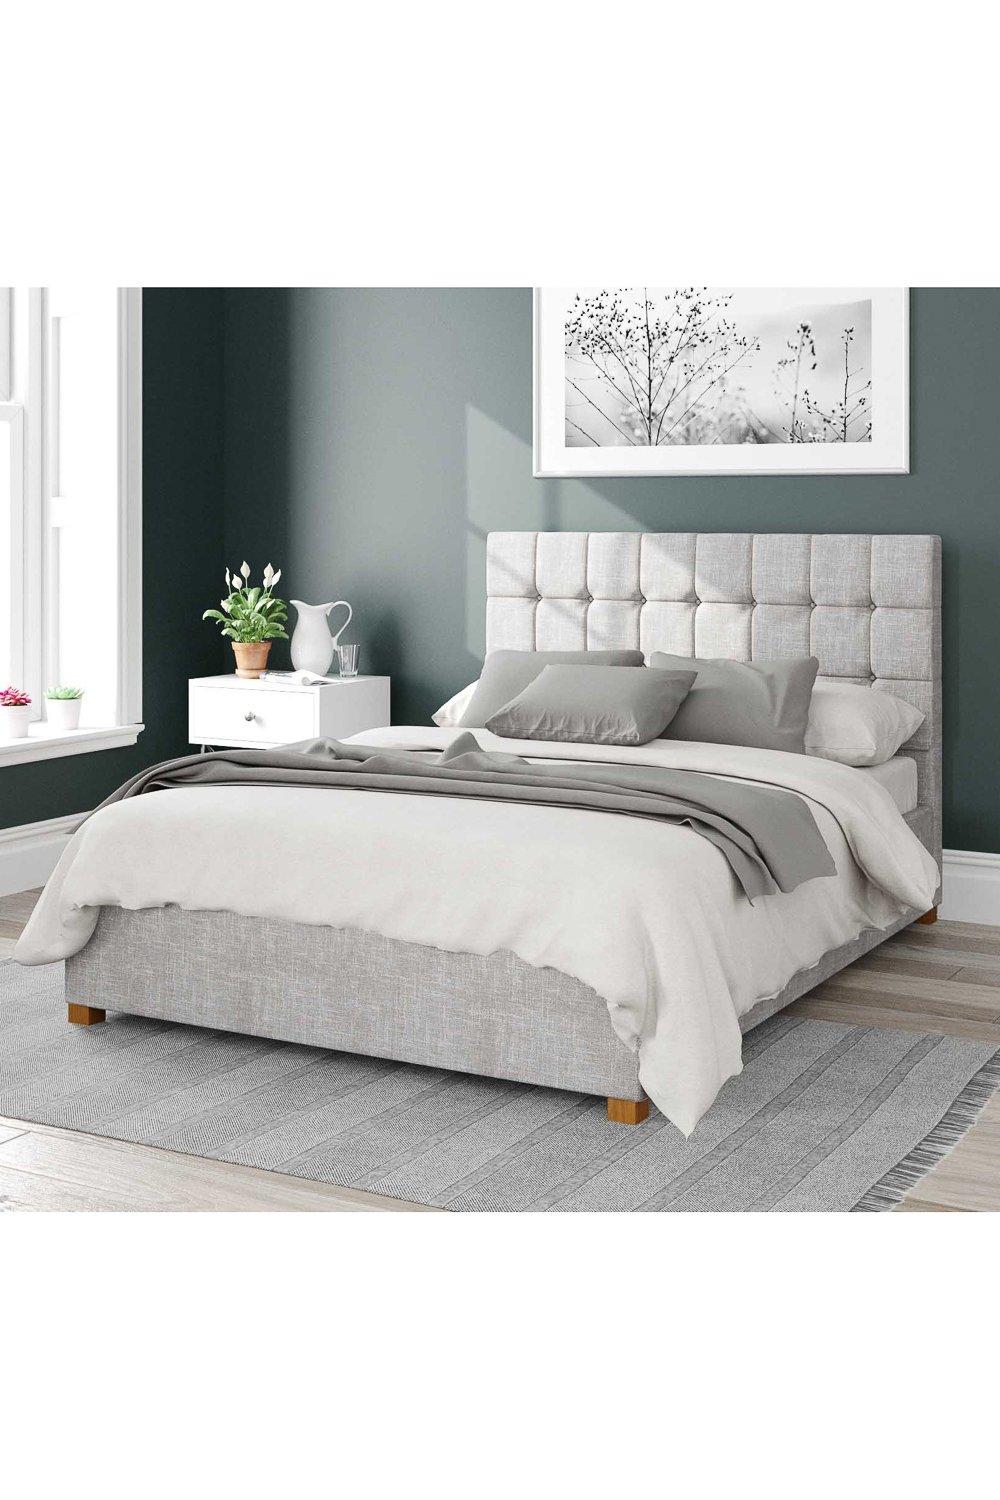 Sinatra Upholstered Ottoman Storage Bed, Pure Pastel Cotton Fabric